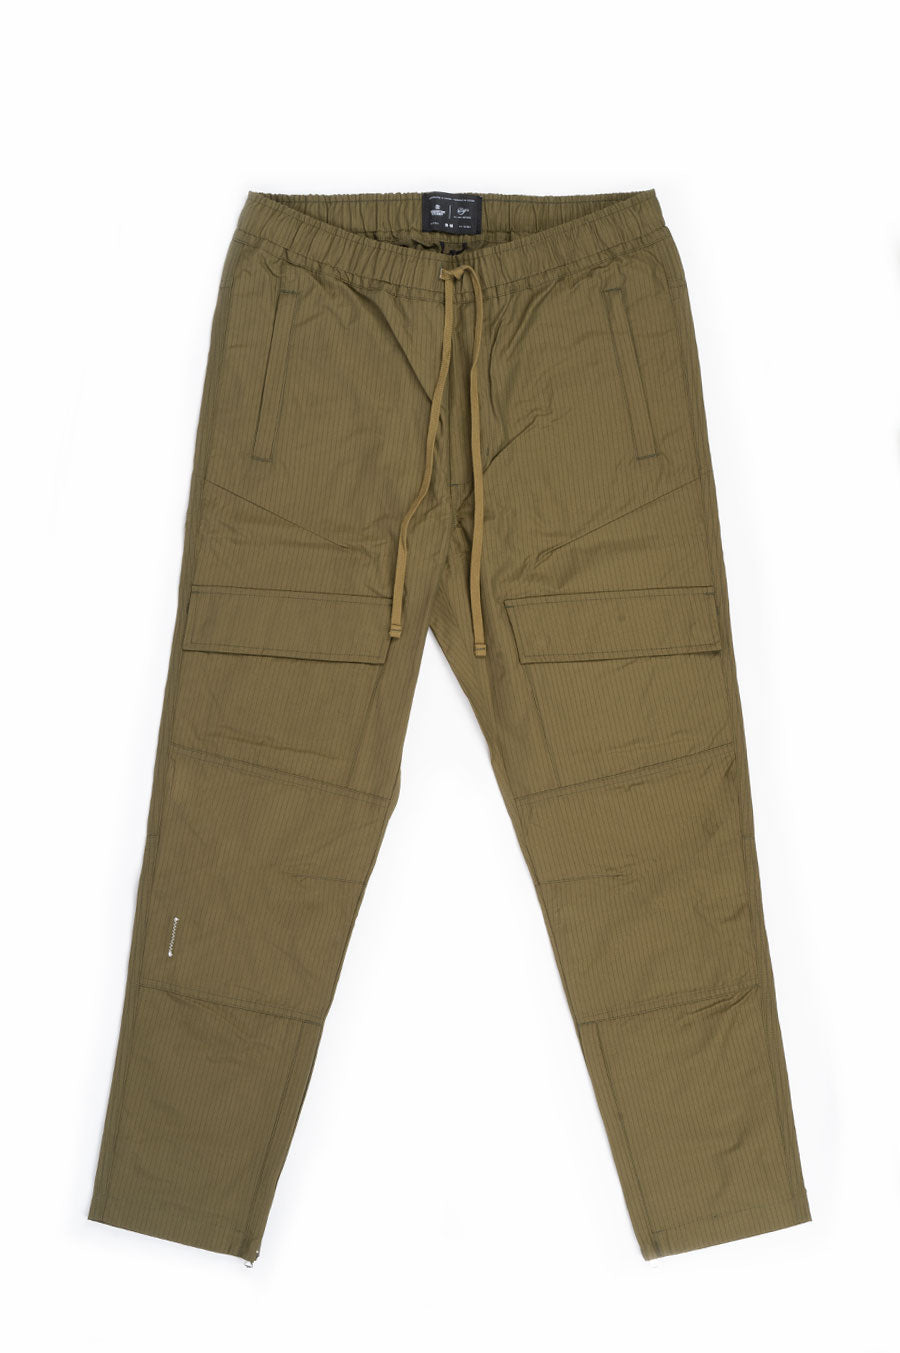 REIGNING CHAMP S04 RIPSTOP CARGO PANT BLENDS MOSS –